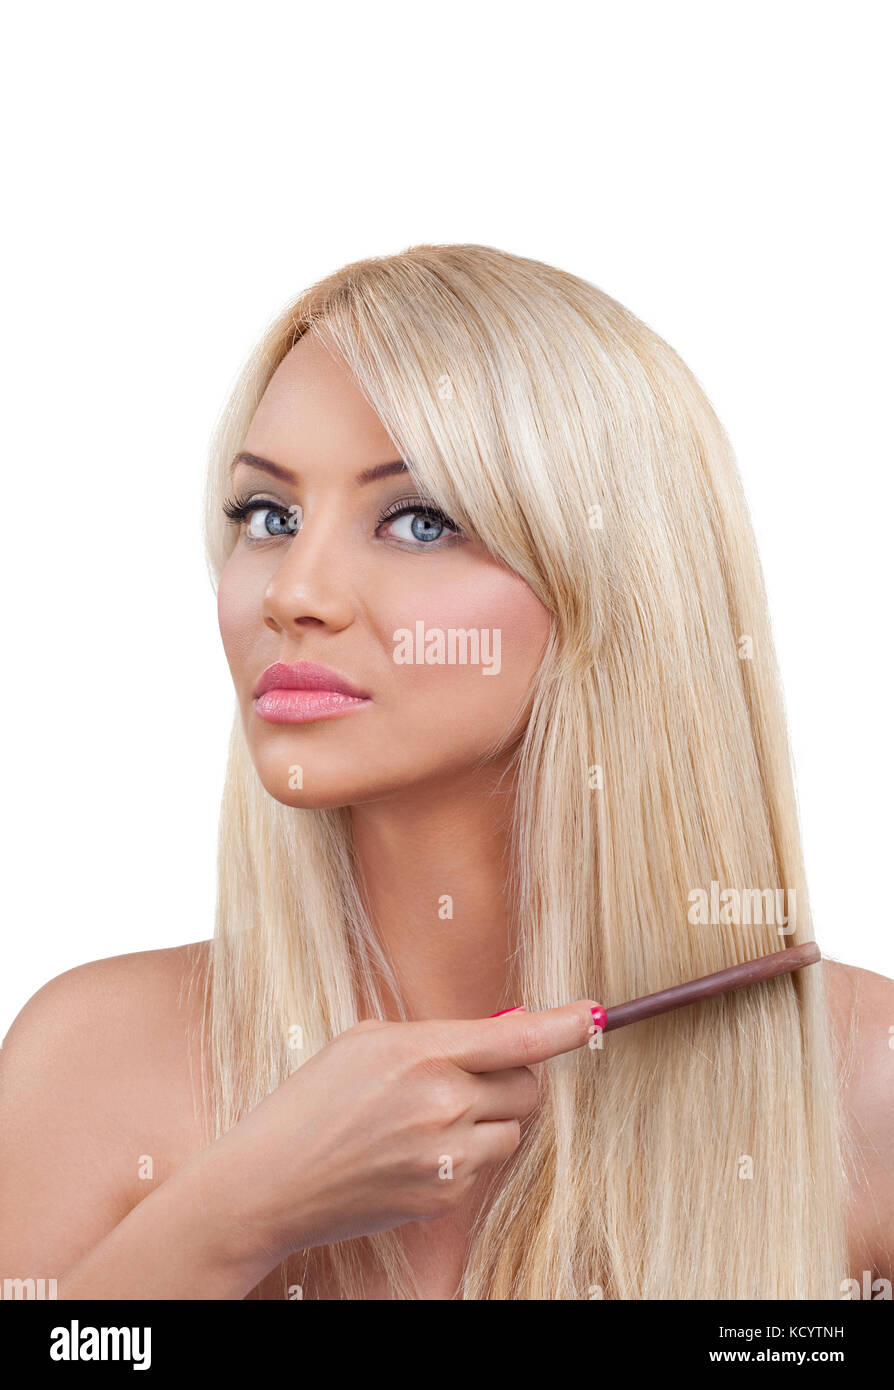 Young blond woman combing her hair Stock Photo